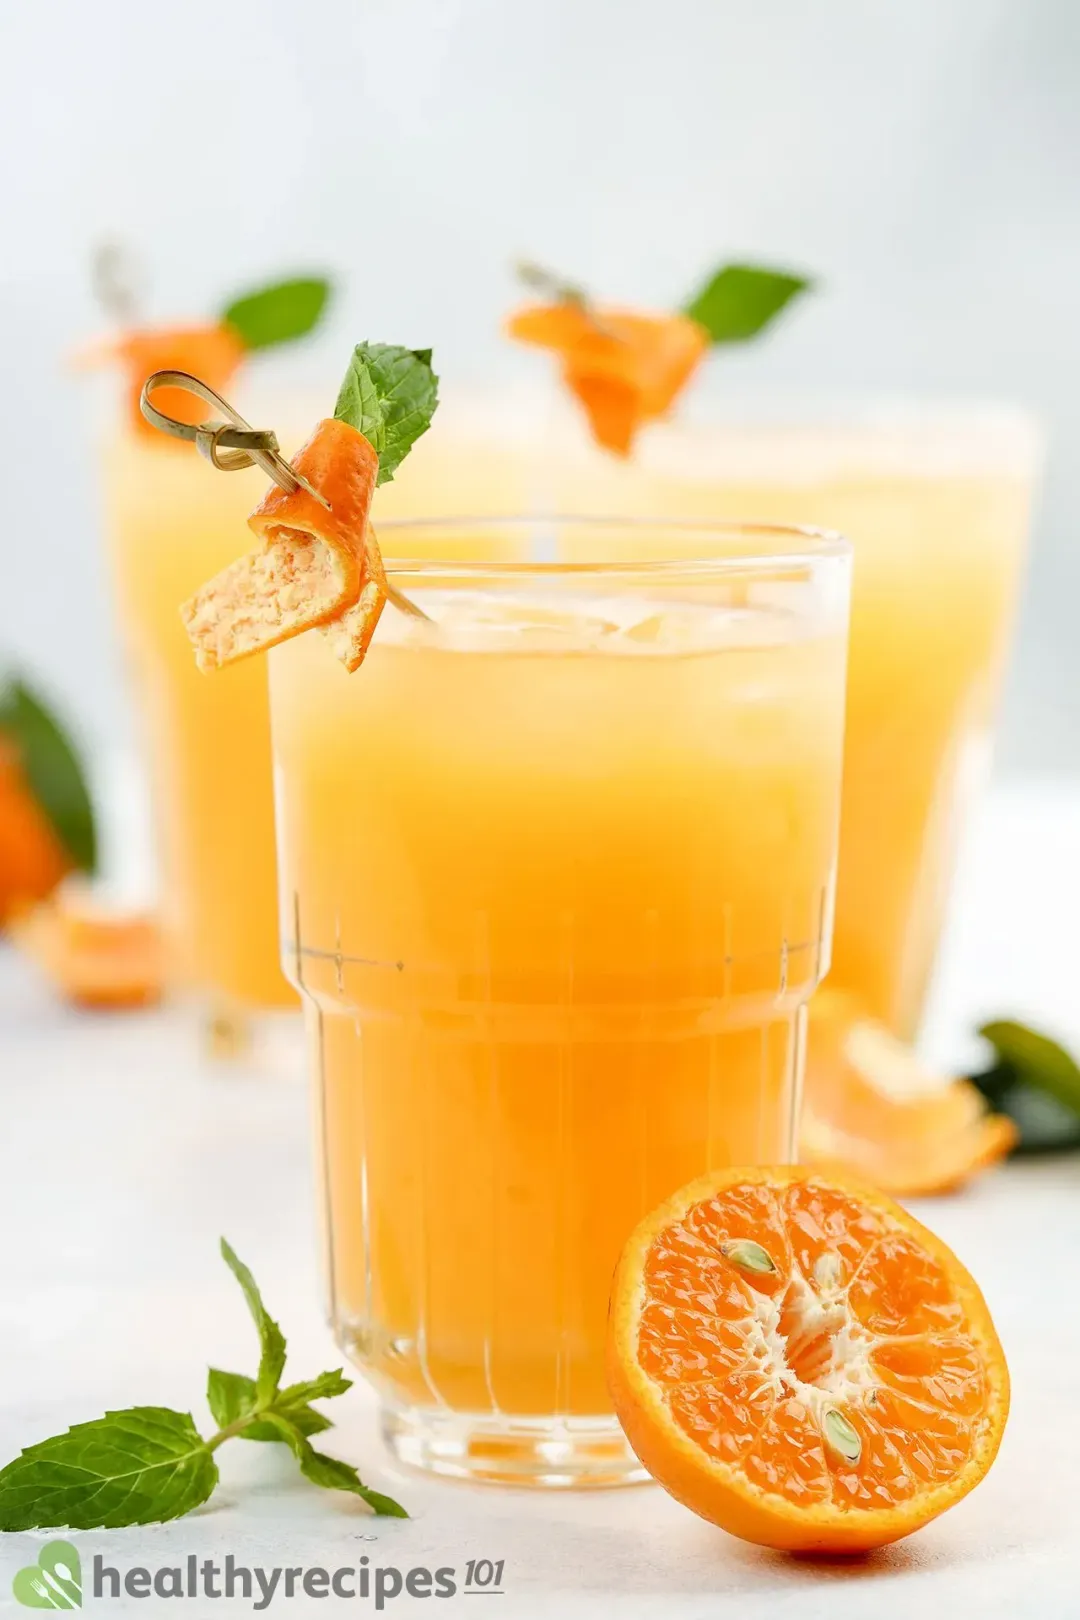 a glass of Tangerine Juice decorated with half Tangerine fruit and mint leaf, two glasses in background